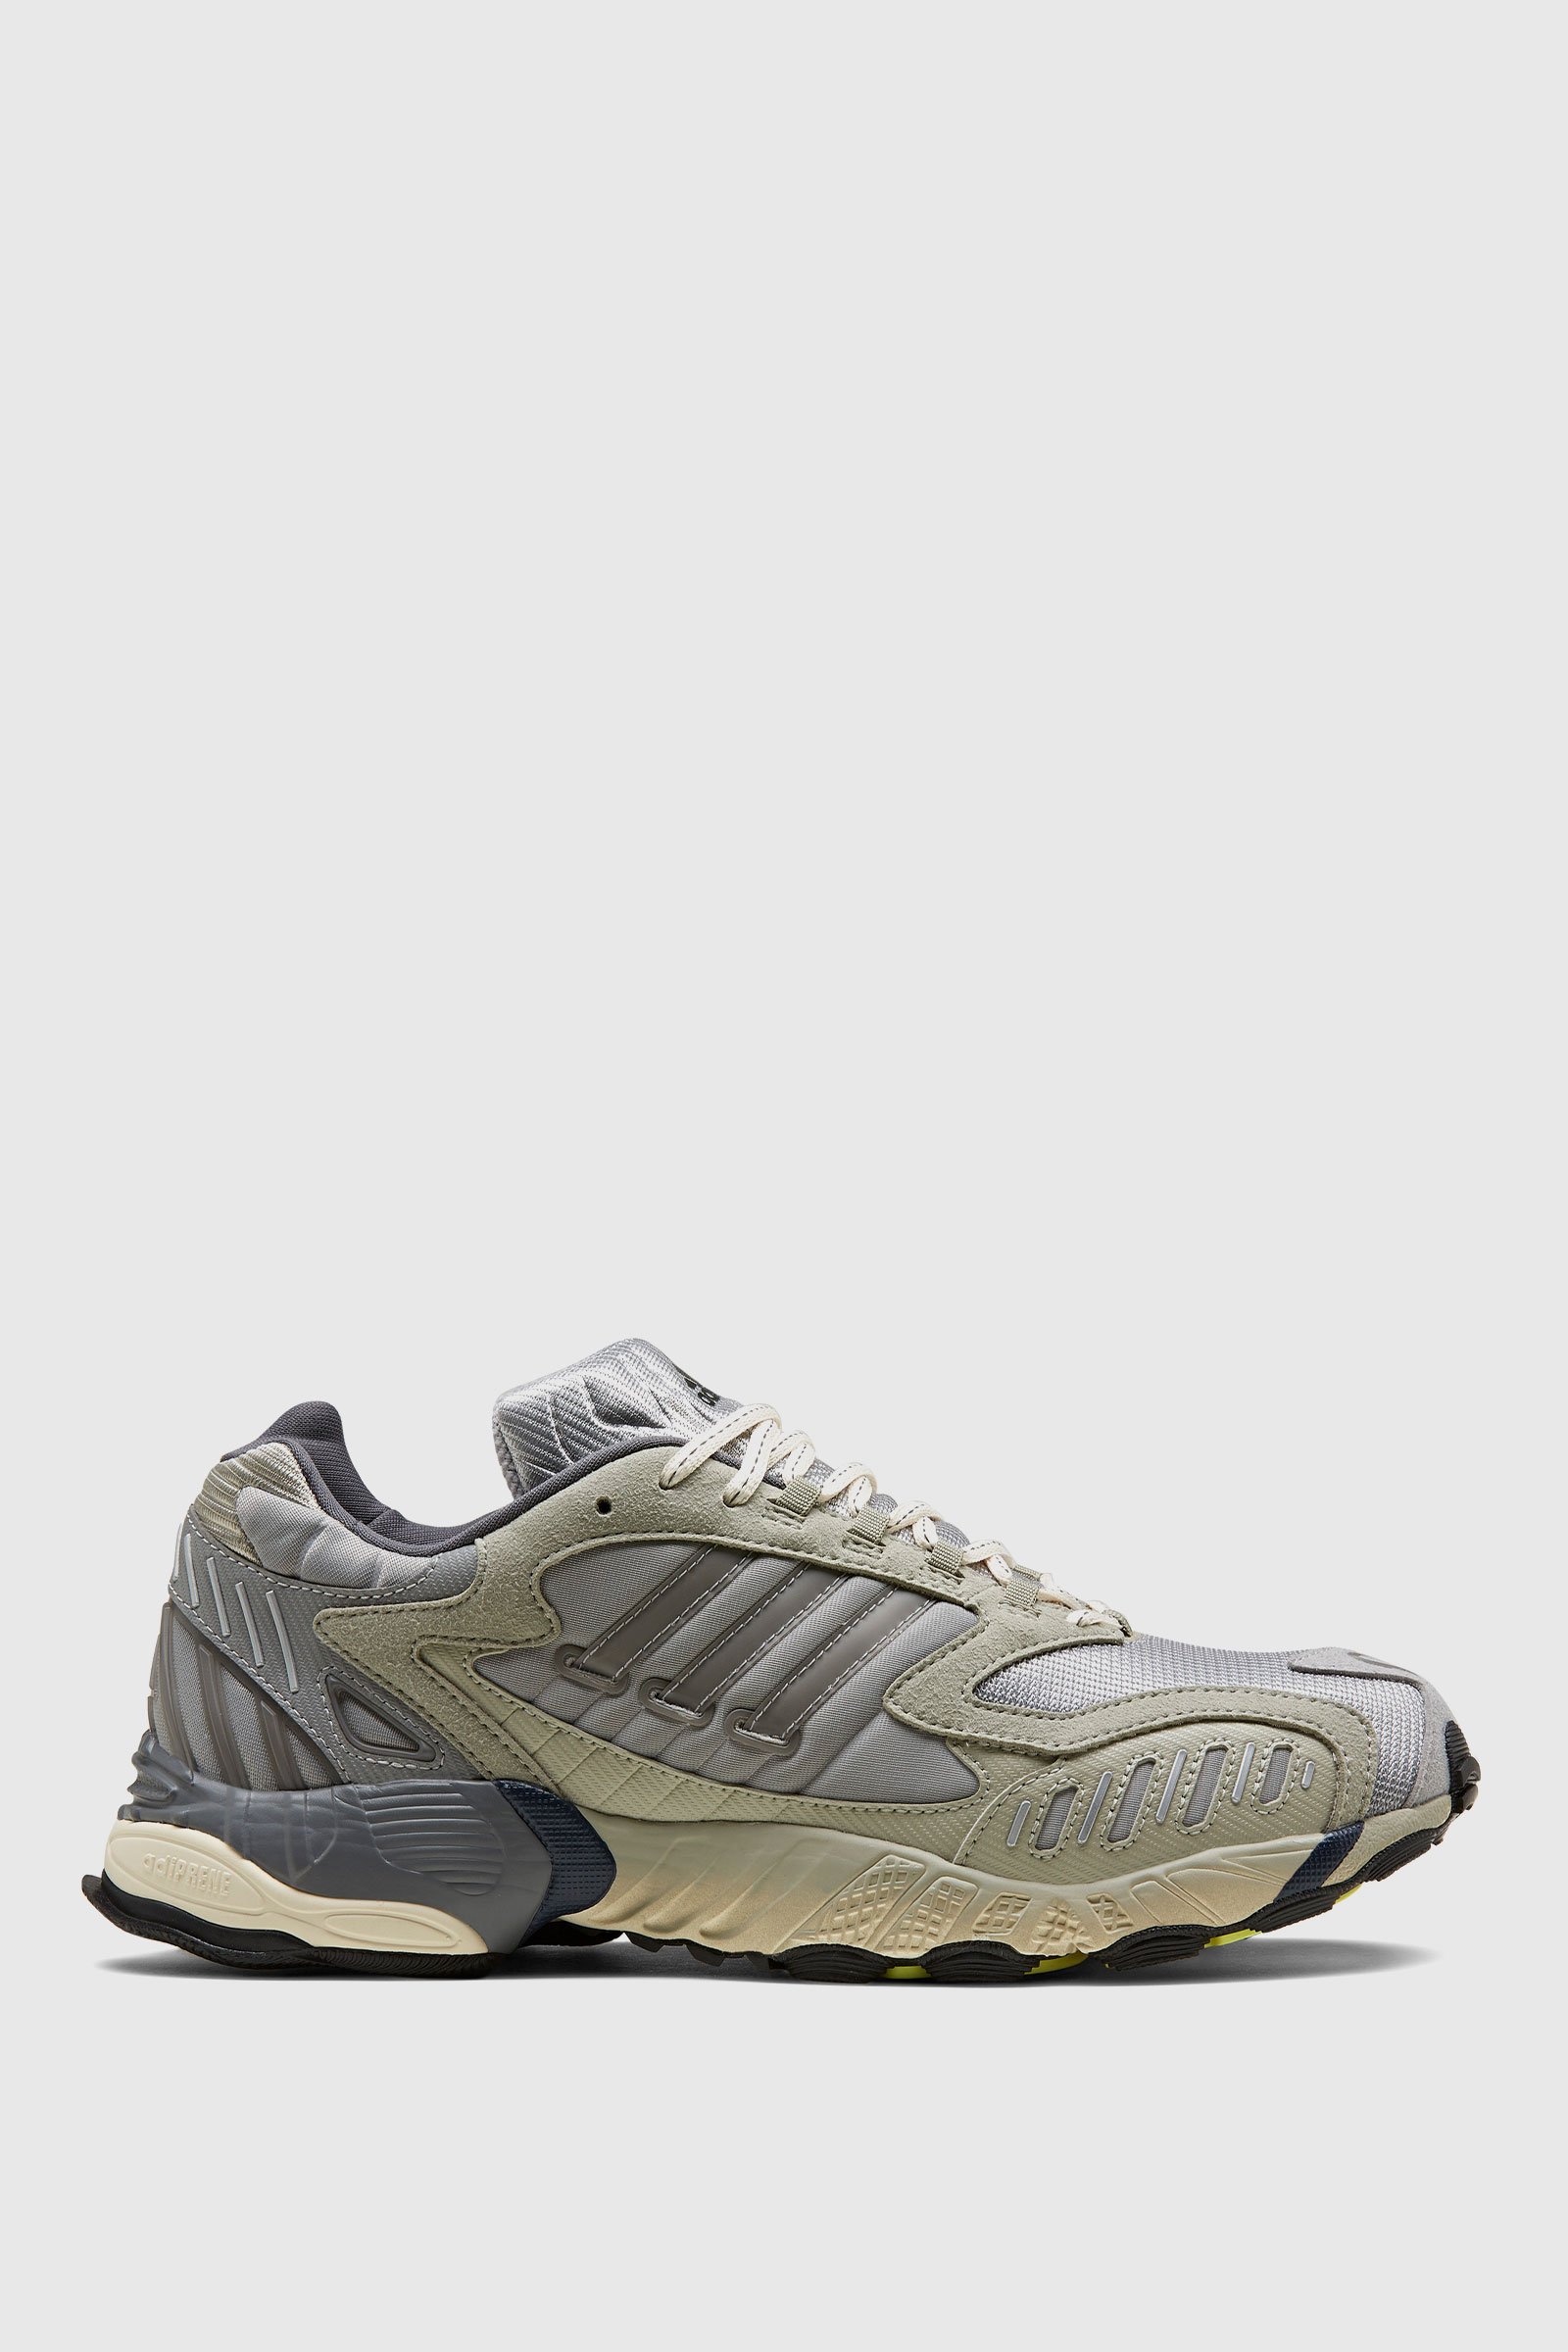 adidas norse projects torsion